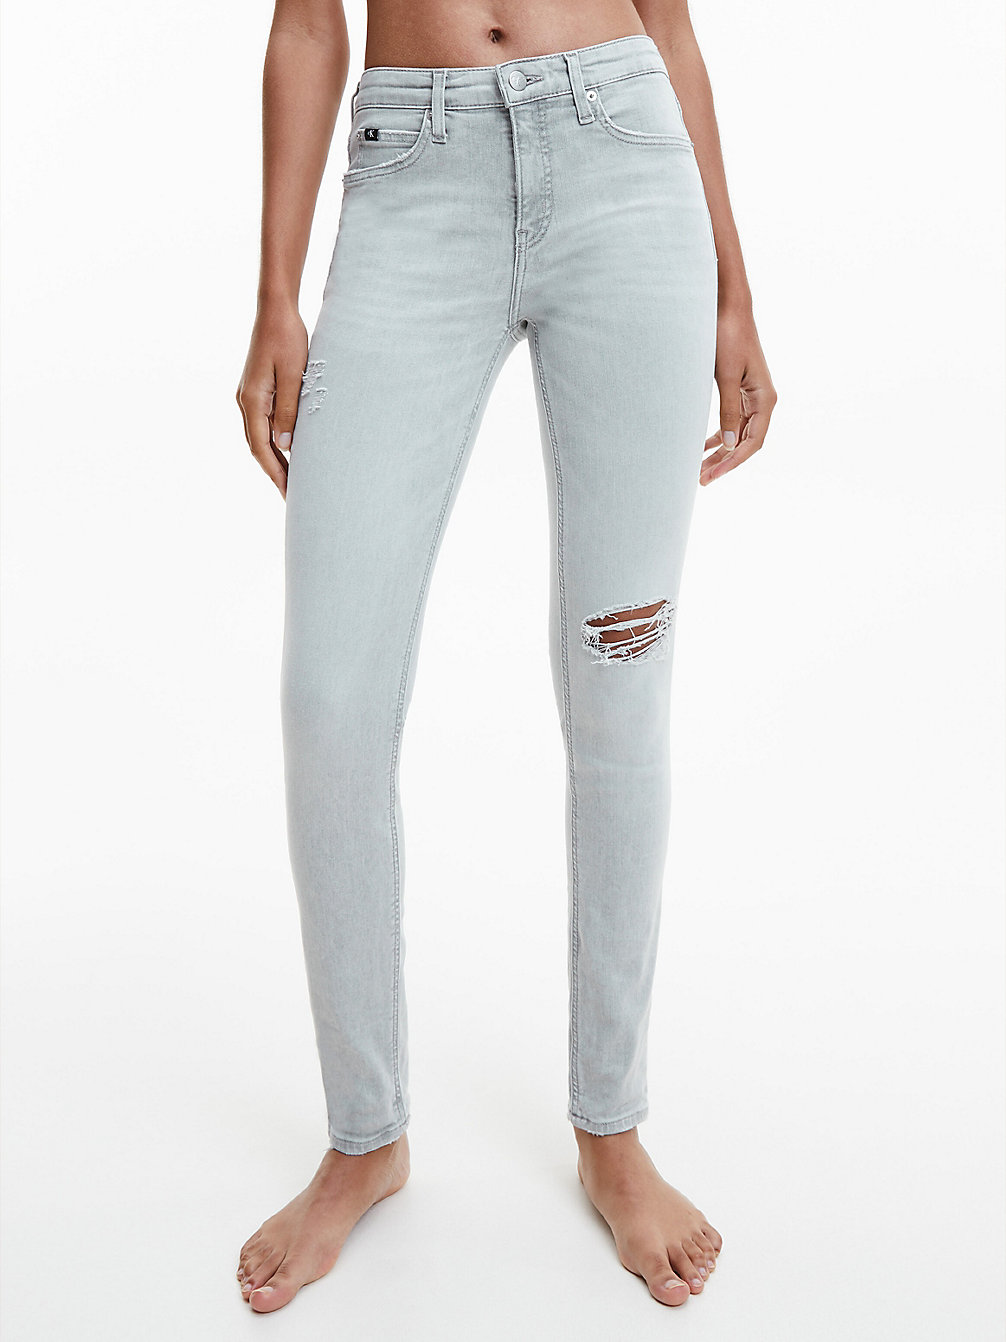 Mid Rise Skinny Jeans > DENIM GREY > undefined mujer > Calvin Klein